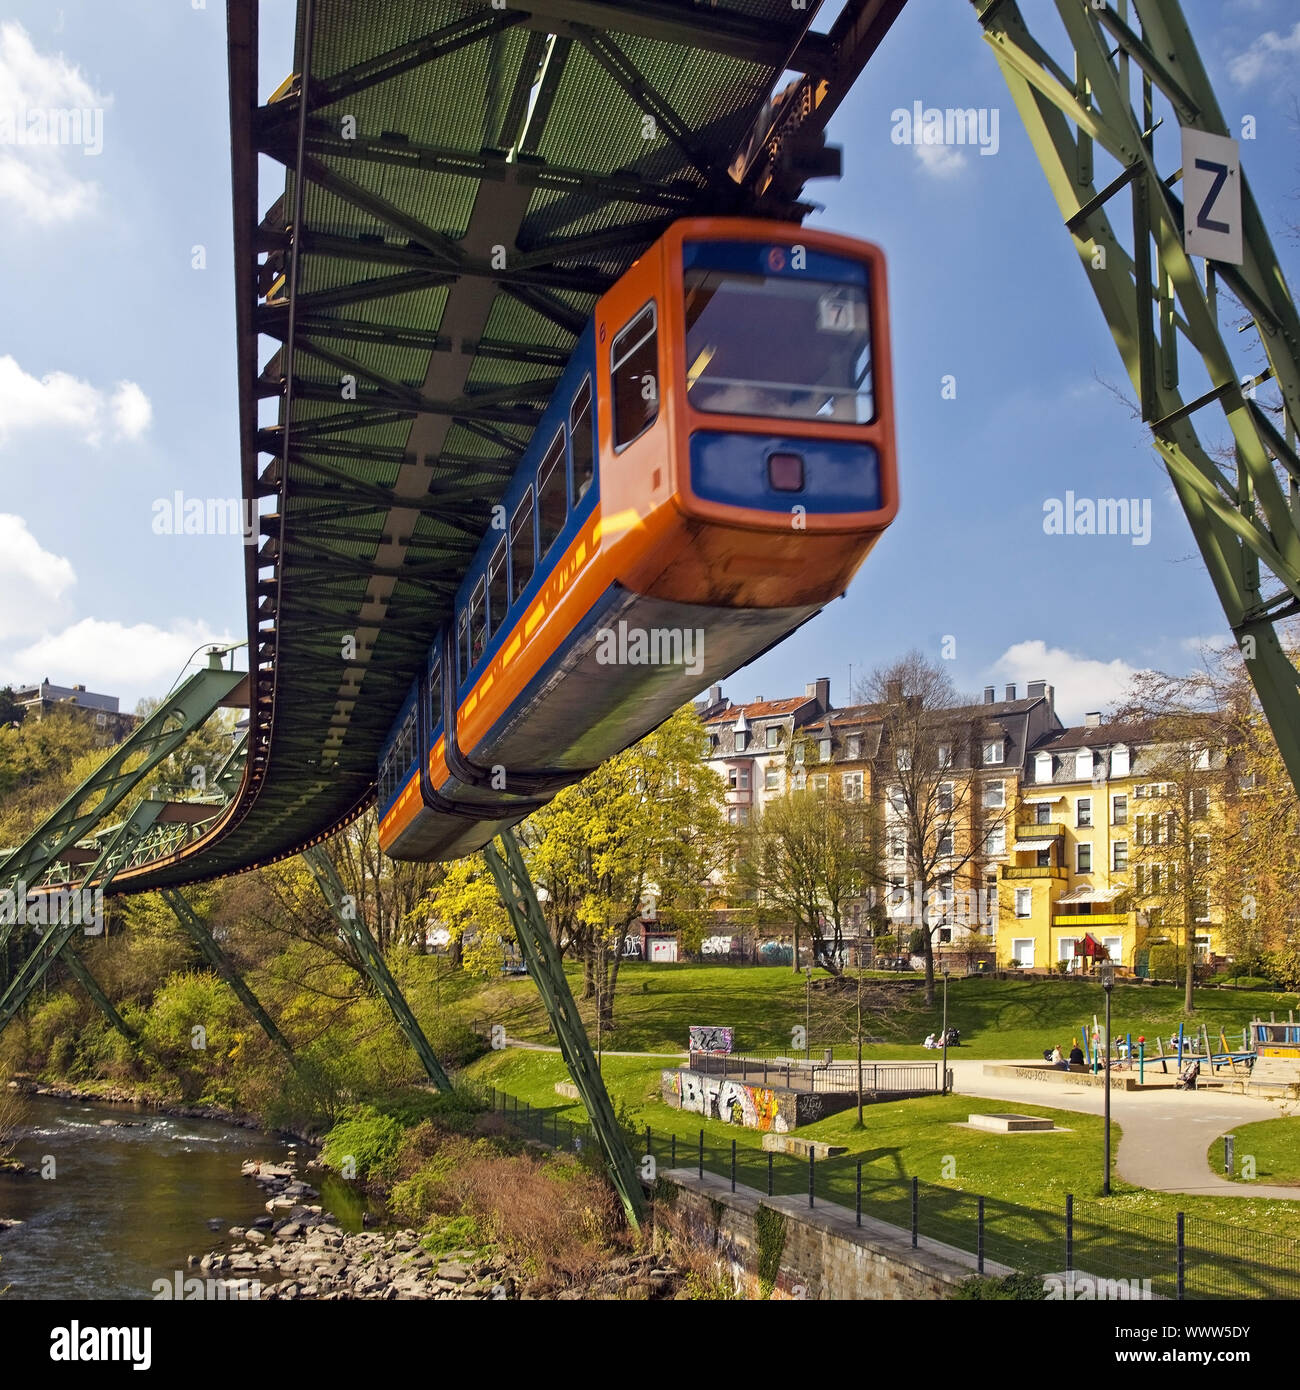 Suspension Railway above river Wupper, Wuppertal, Bergisches Land, North Rhine-Westphalia, Germany Stock Photo